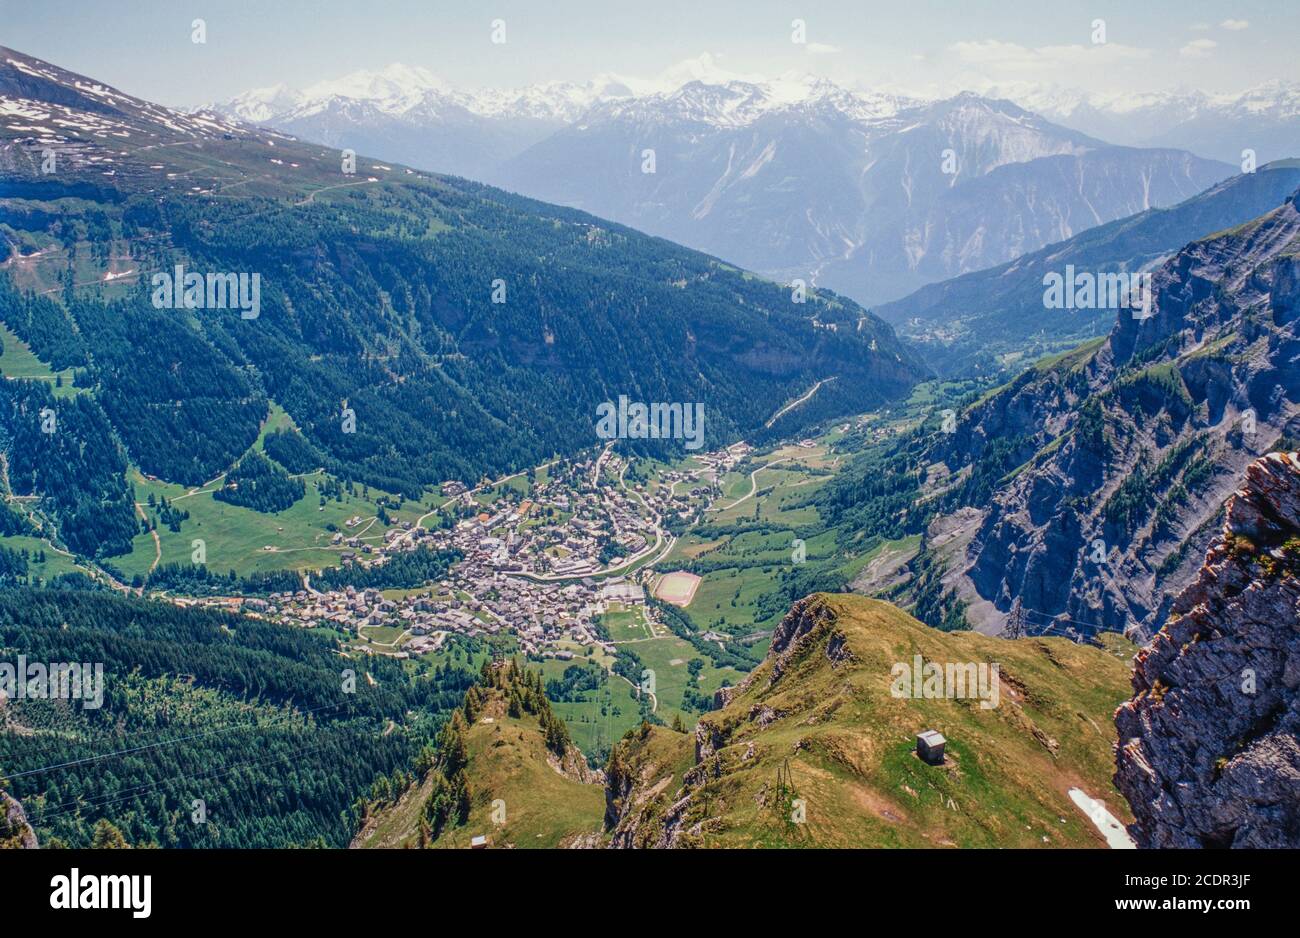 Spa town of Leukerbad in the Valais, Switzerland. Archive image c.1990s. High resolution scan from transparency, August 2020. Credit: Malcolm Park/Alamy. Stock Photo